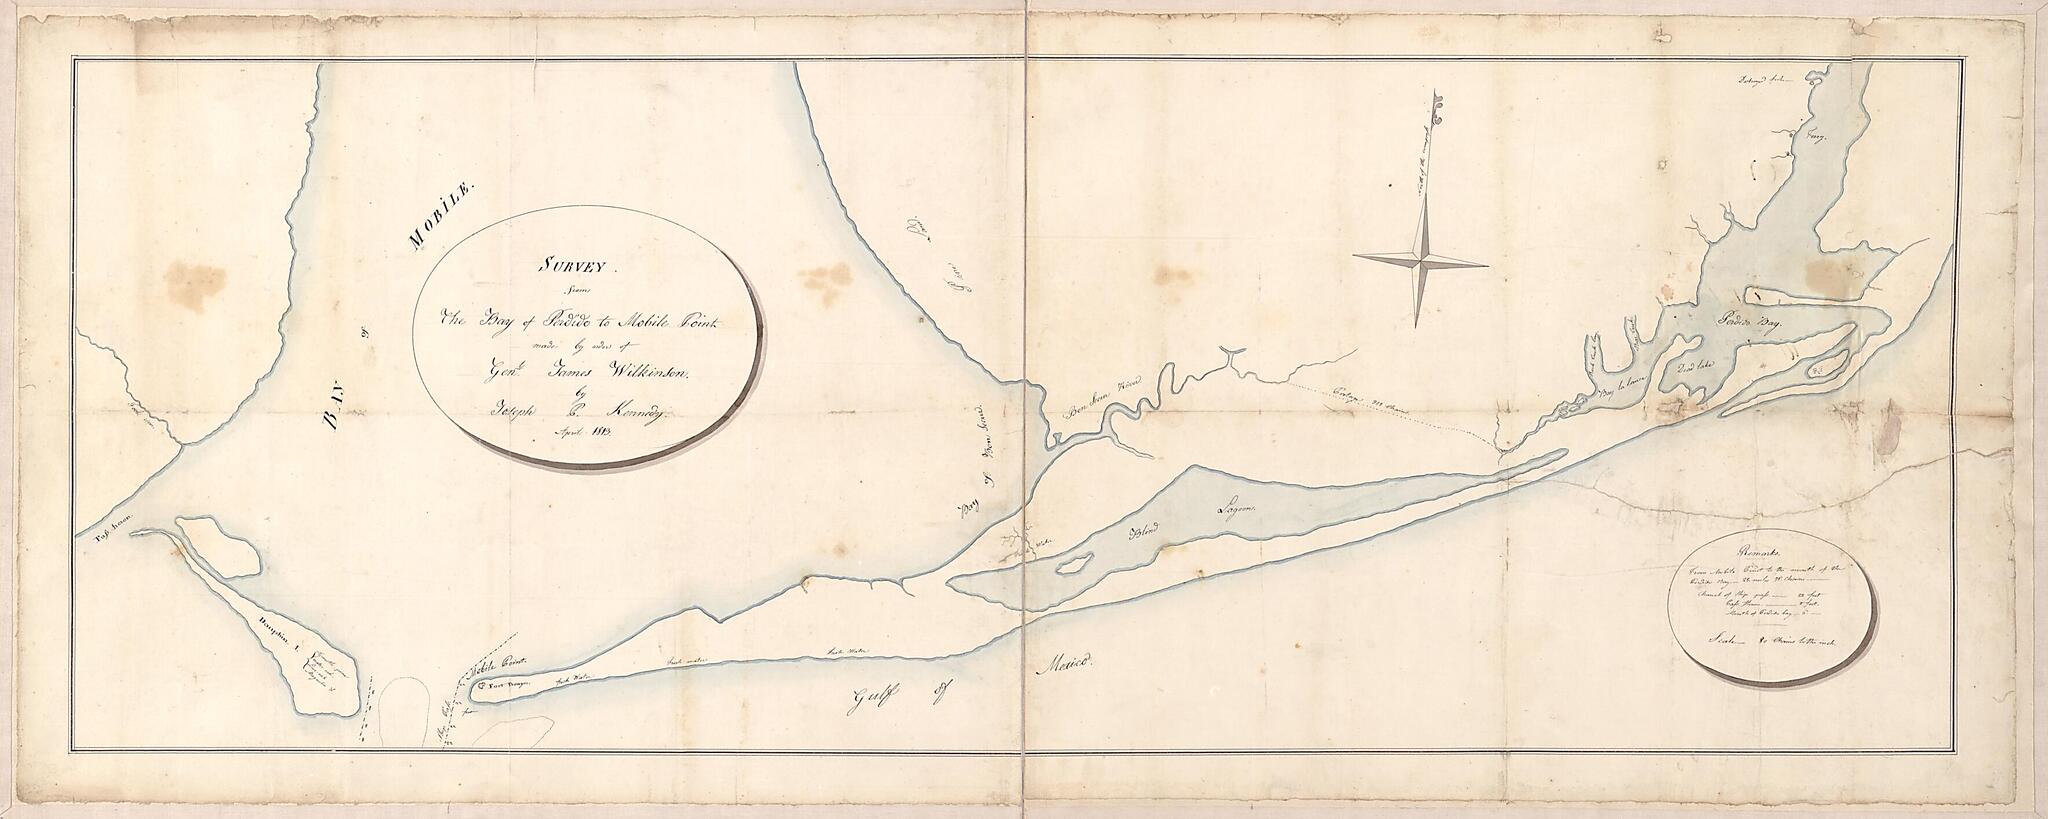 This old map of Survey from the Bay of Perdido to Mobile Point Made by Order of Genl. James Wilkinson from 1813 was created by Joseph C. Kennedy in 1813